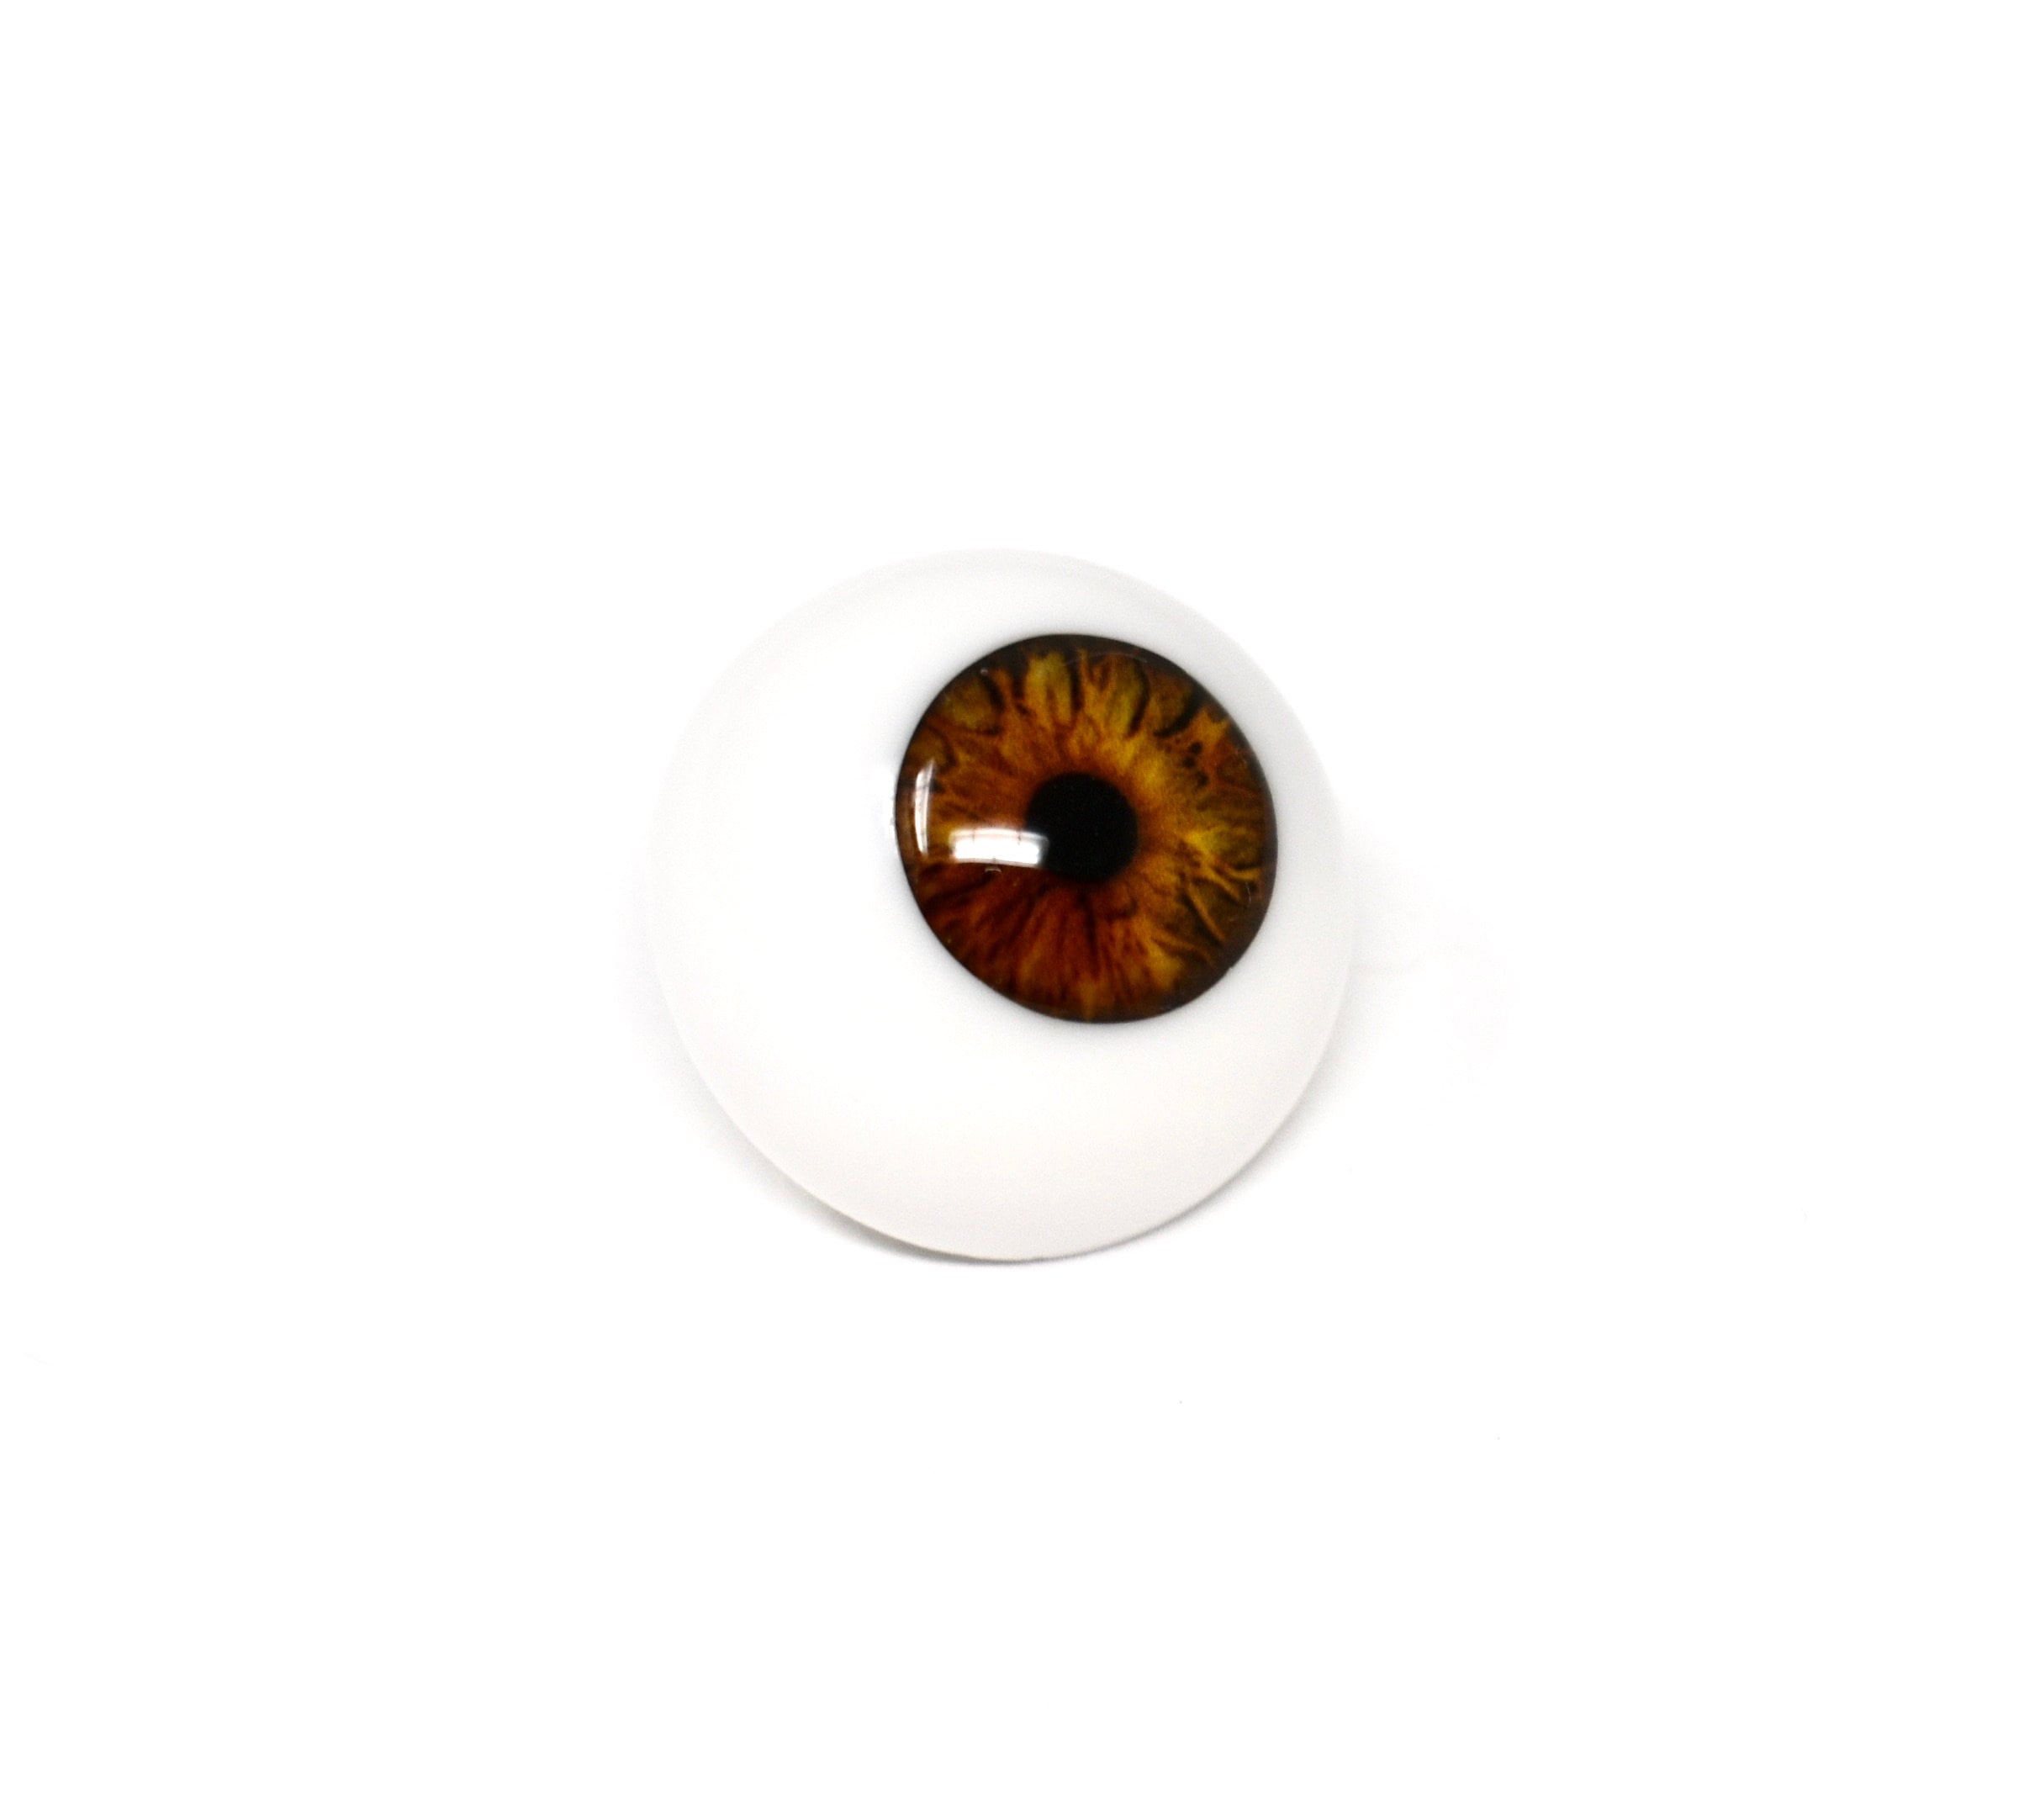 BROWN Safety Eyes With Black Pupil, Available in 10 Different